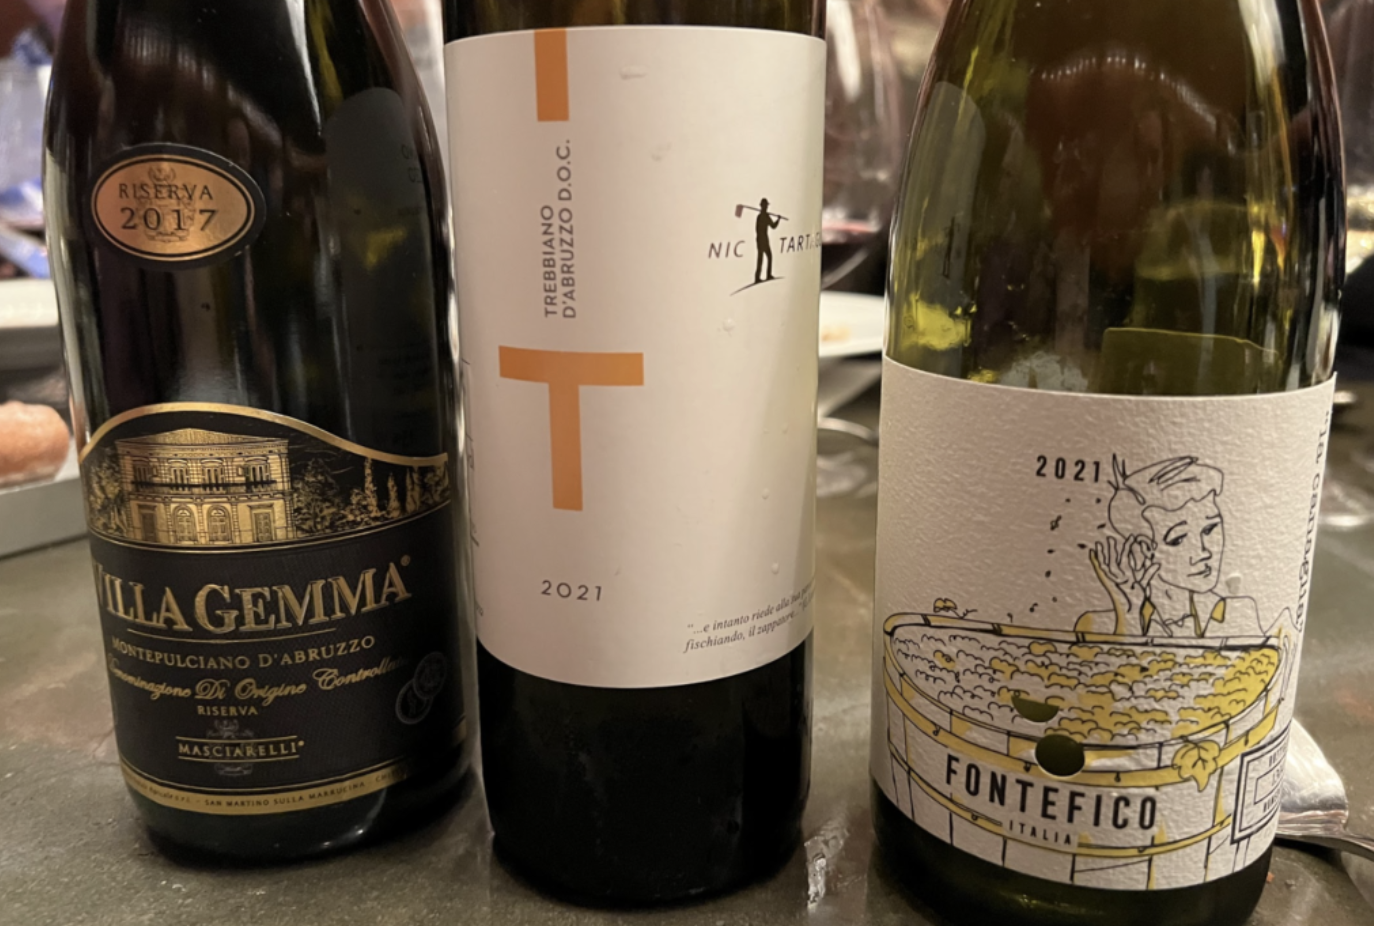 Philly loves Italian Wines - Incredible time at 'Charming Taste of Europe' Holiday Dinner